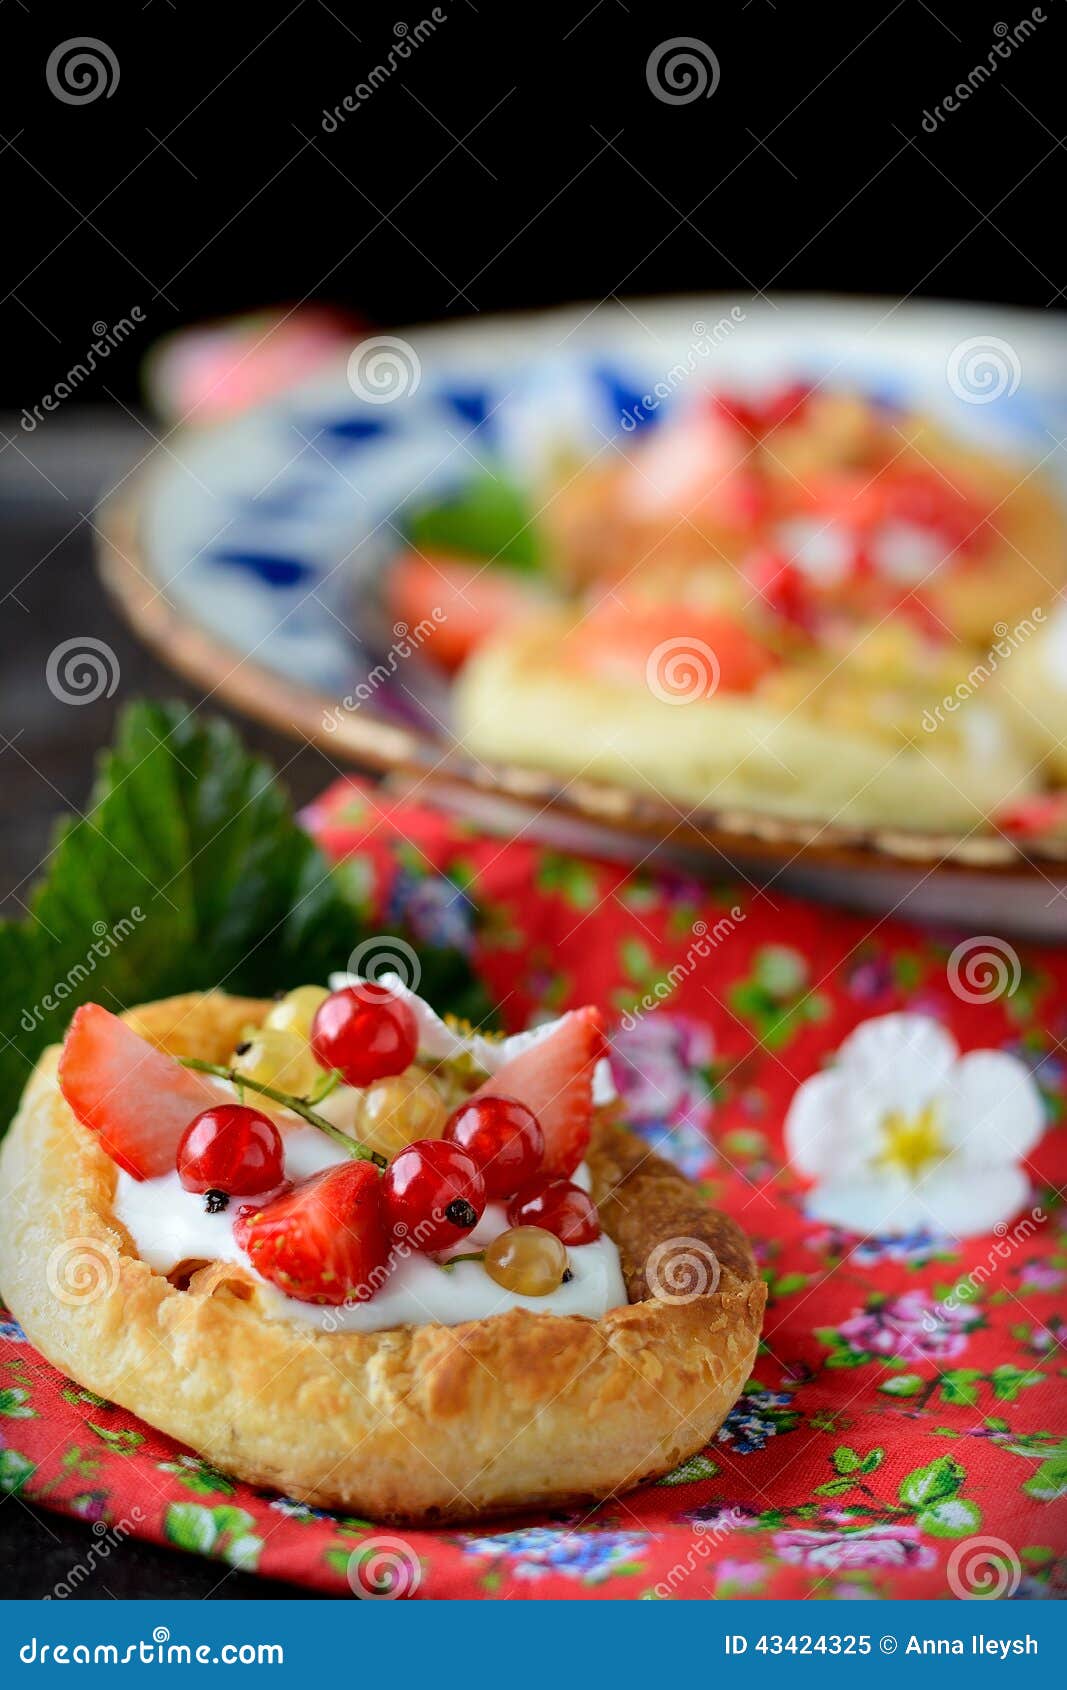 Cottage Cheese Cream Tarts with Berries and Fruits Stock Image - Image ...